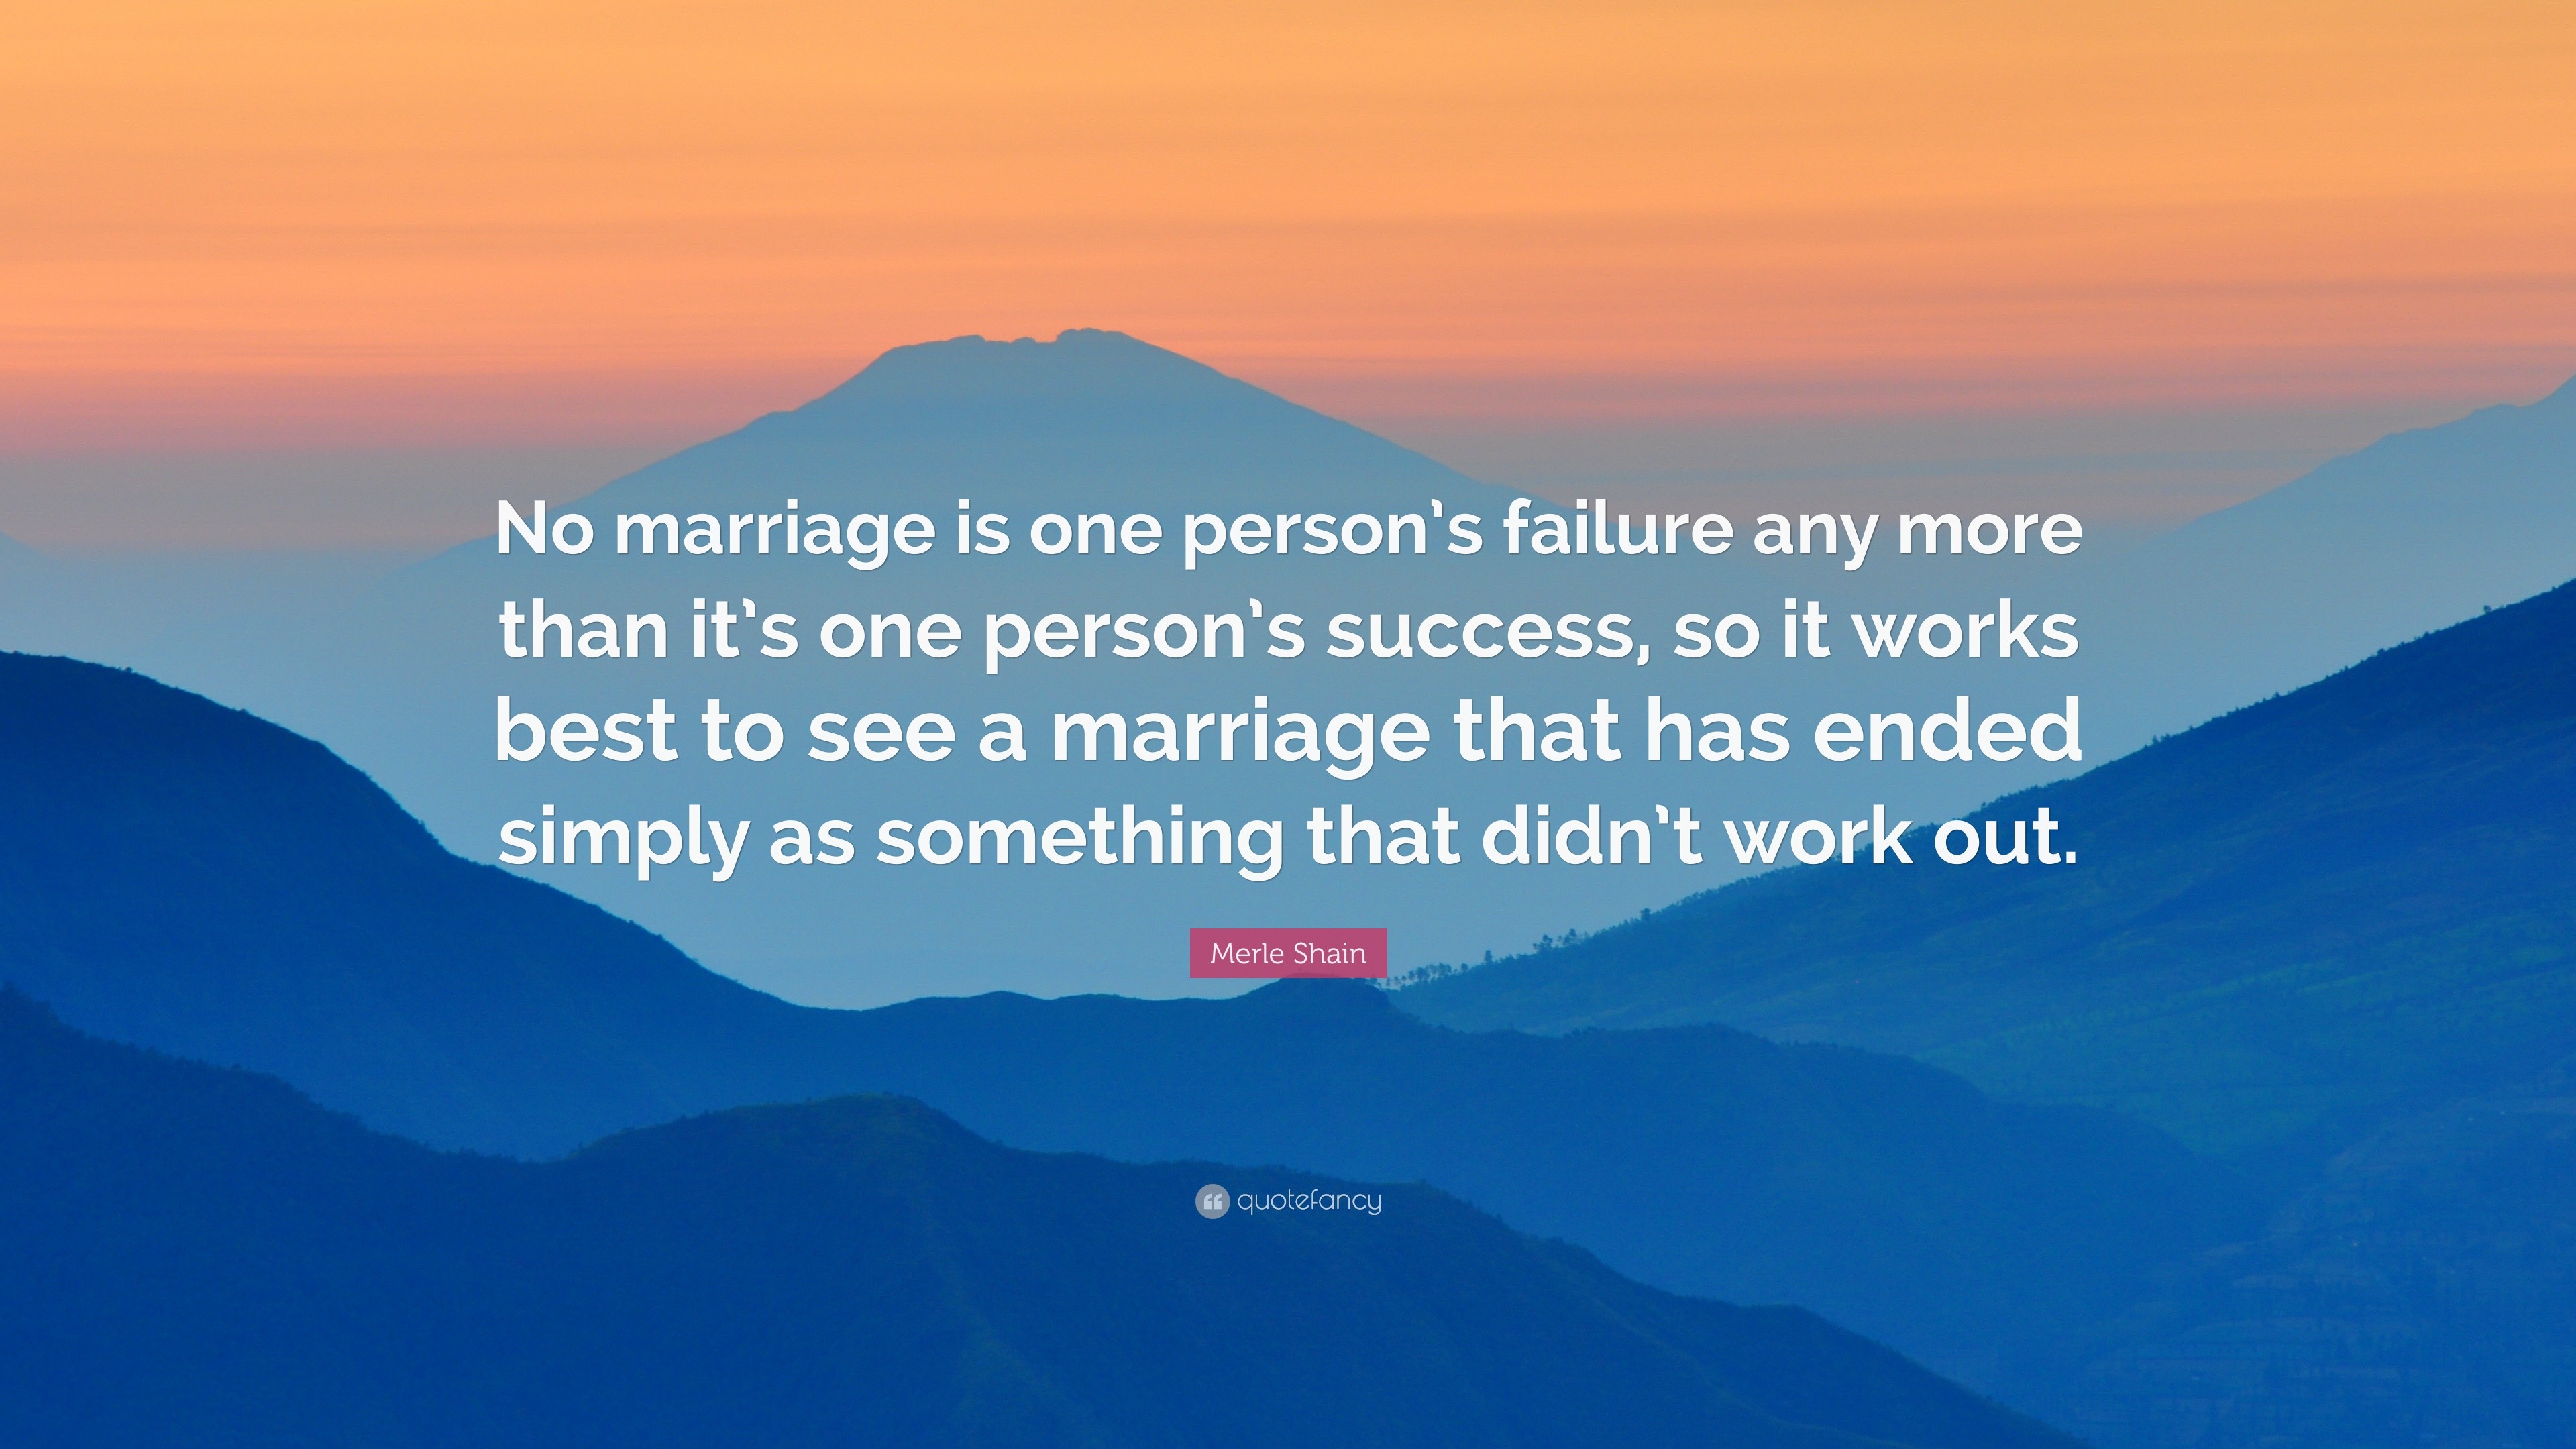 Merle Shain Quote: “No marriage is one person’s failure any more than ...